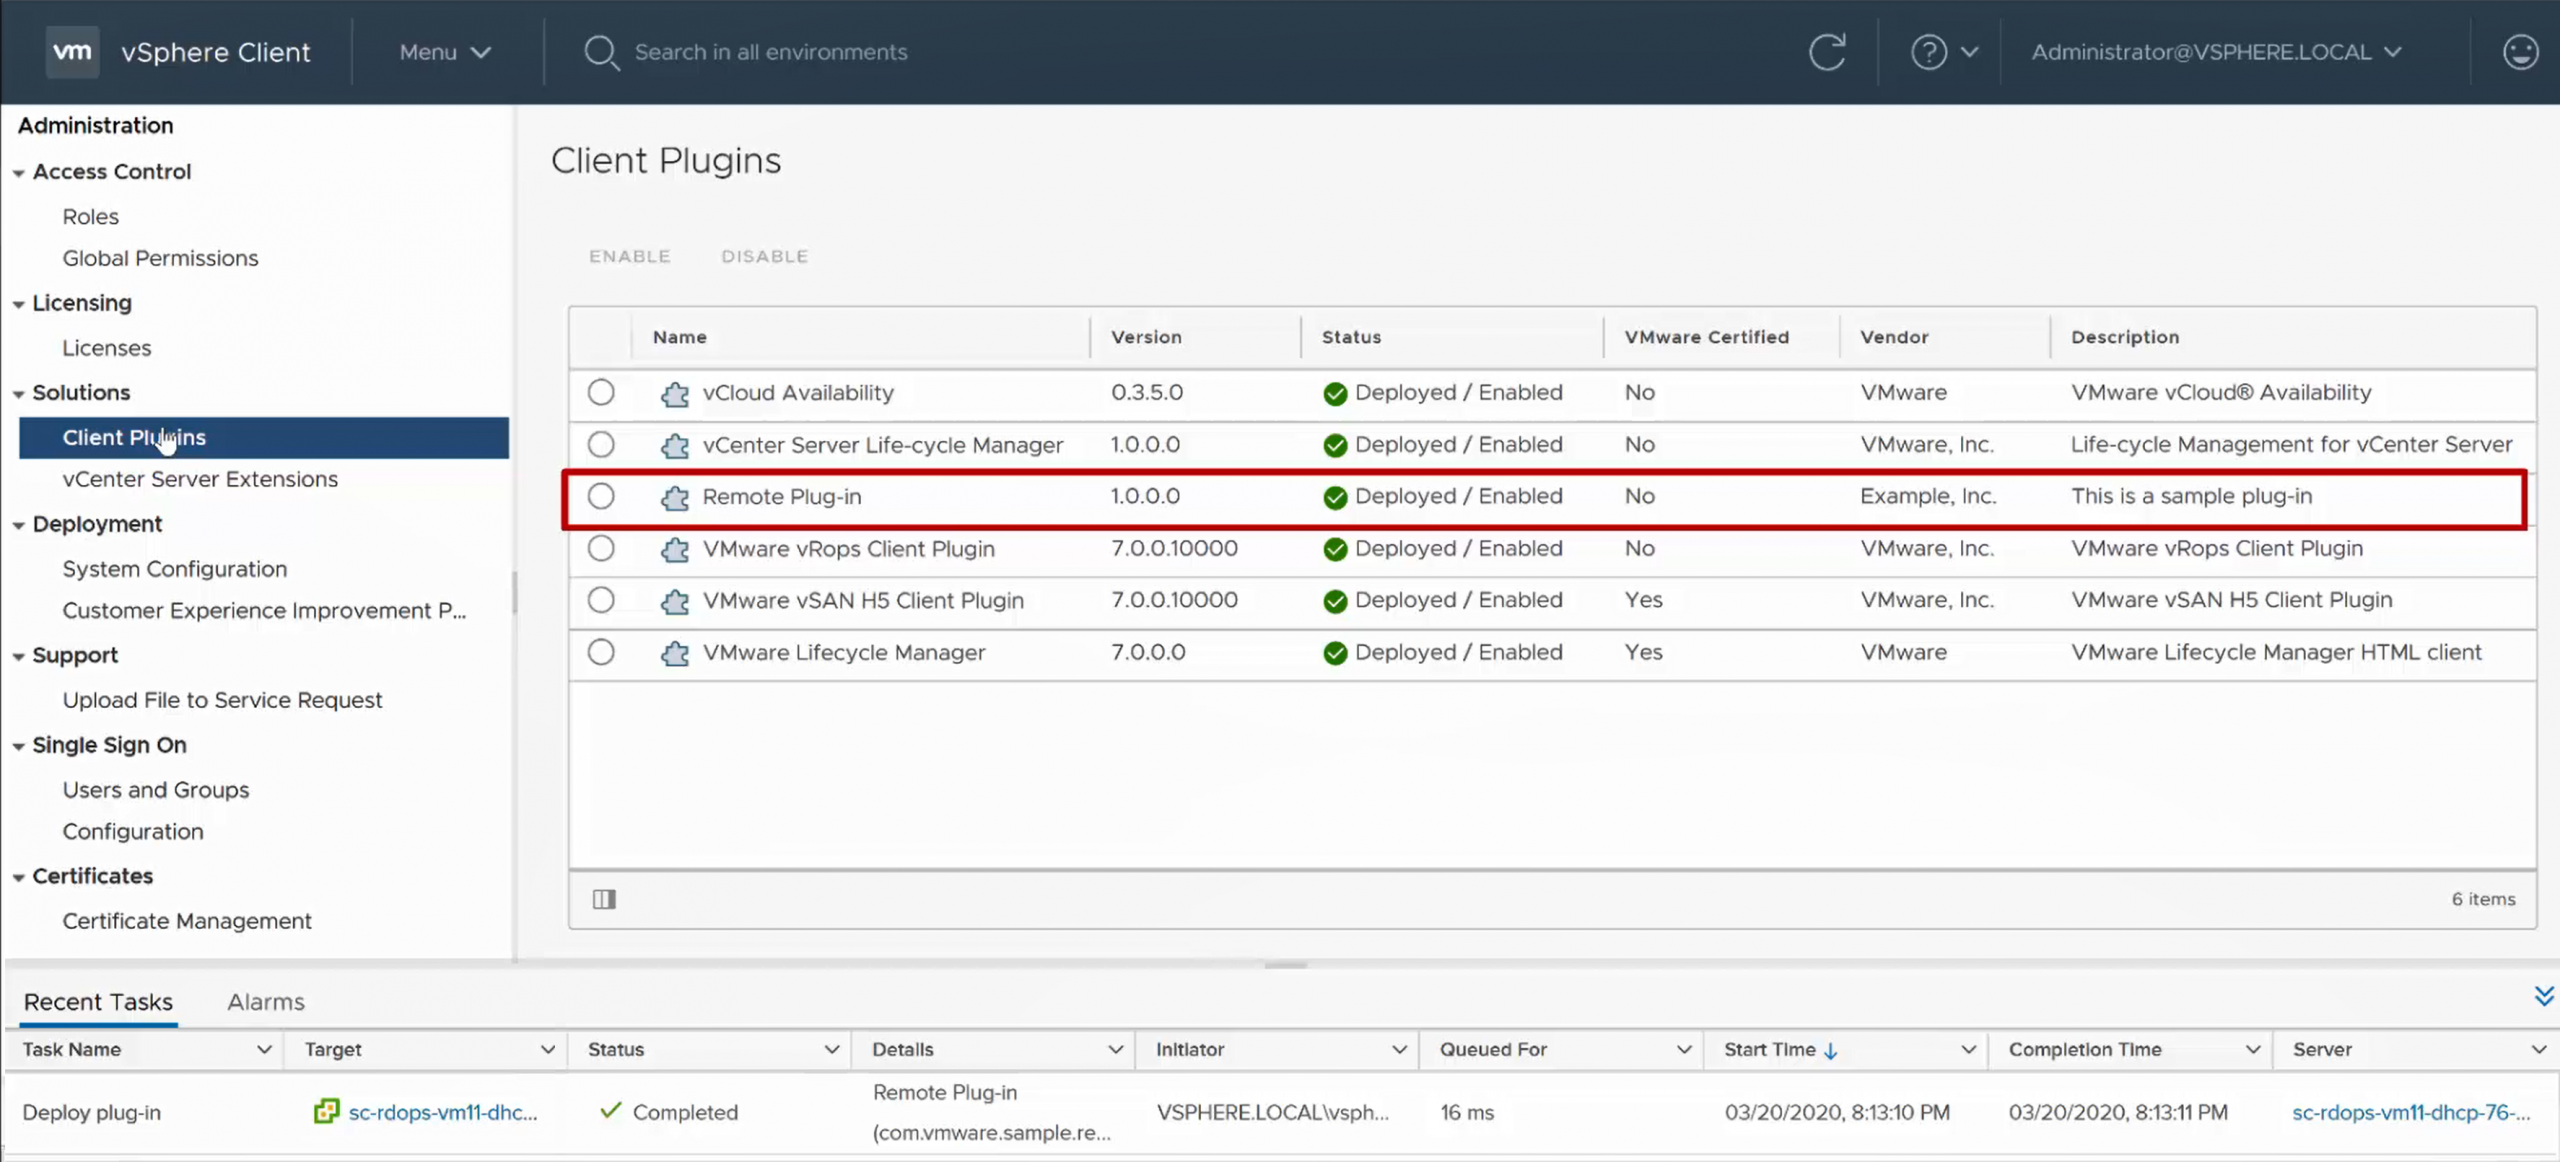 Operators can access, deploy and configure client plugins from vSphere. Image provided by VMware.